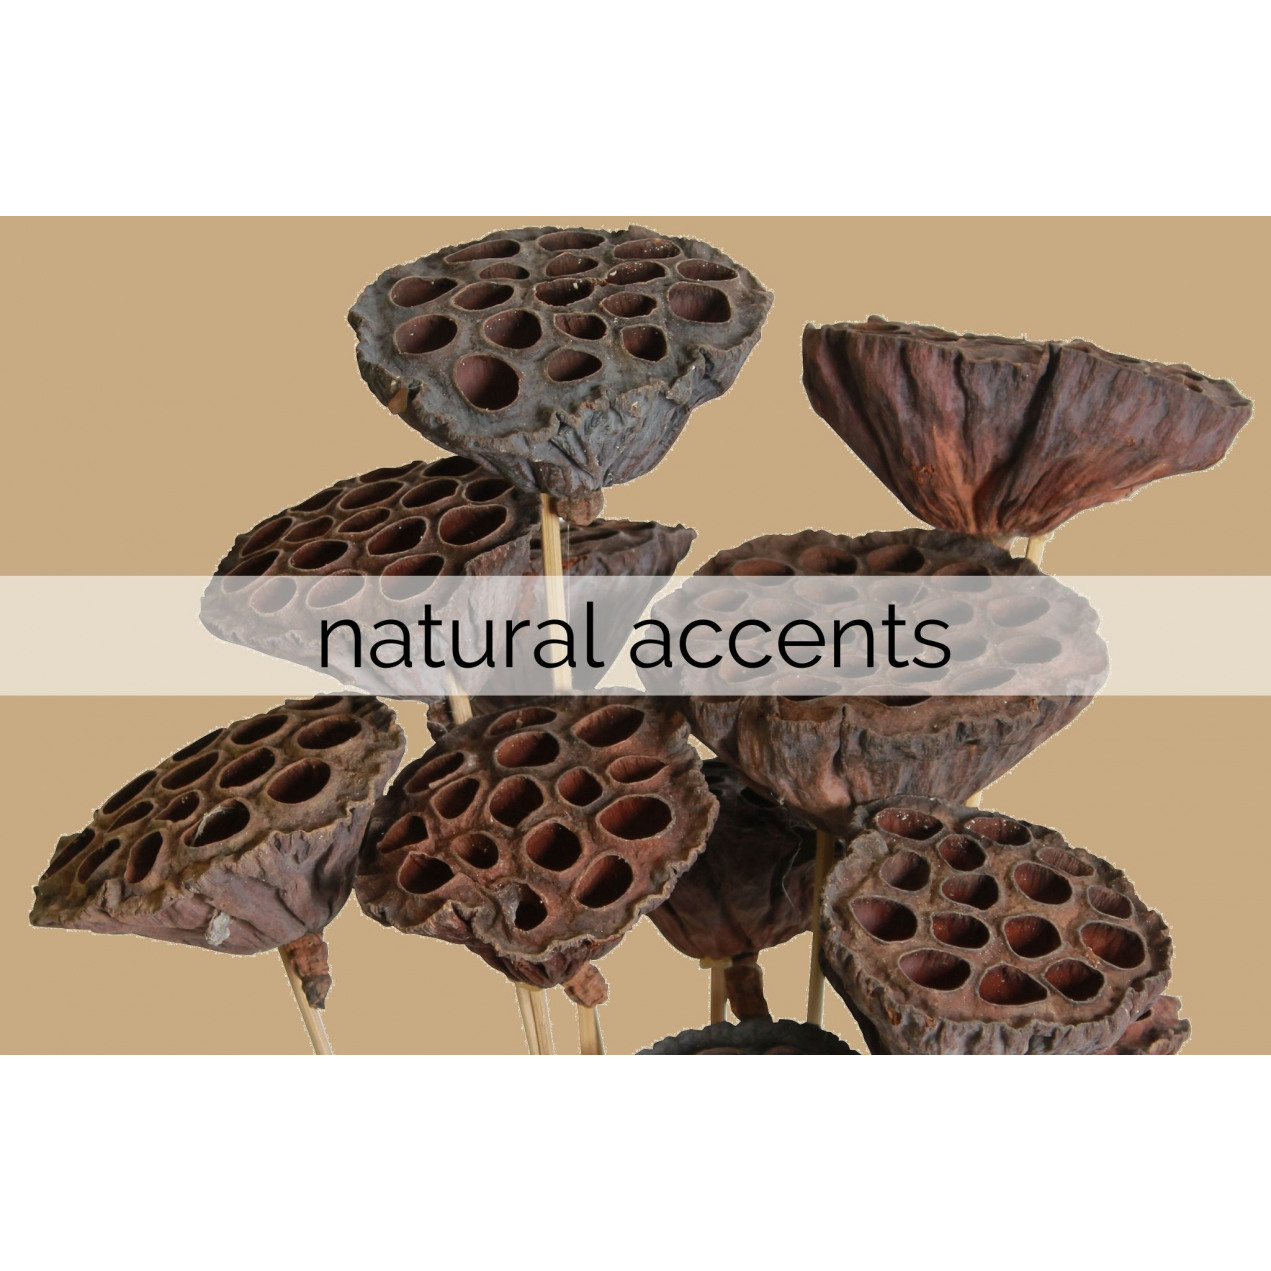 natural accents